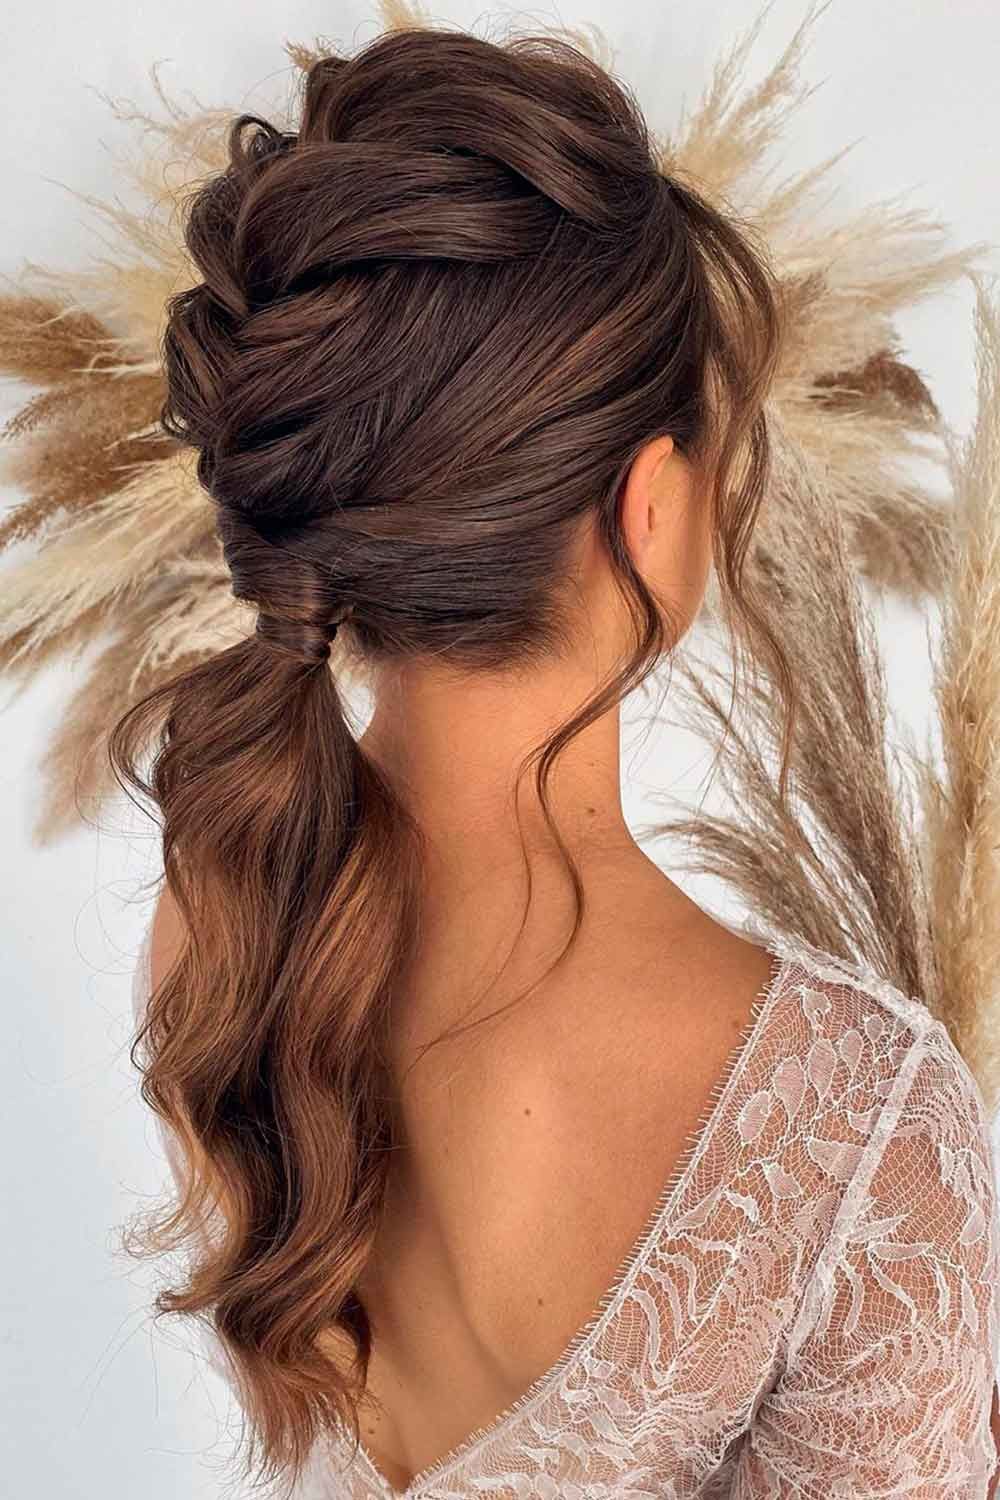 Elegant and Stylish: Formal Hairstyles for Long Hair